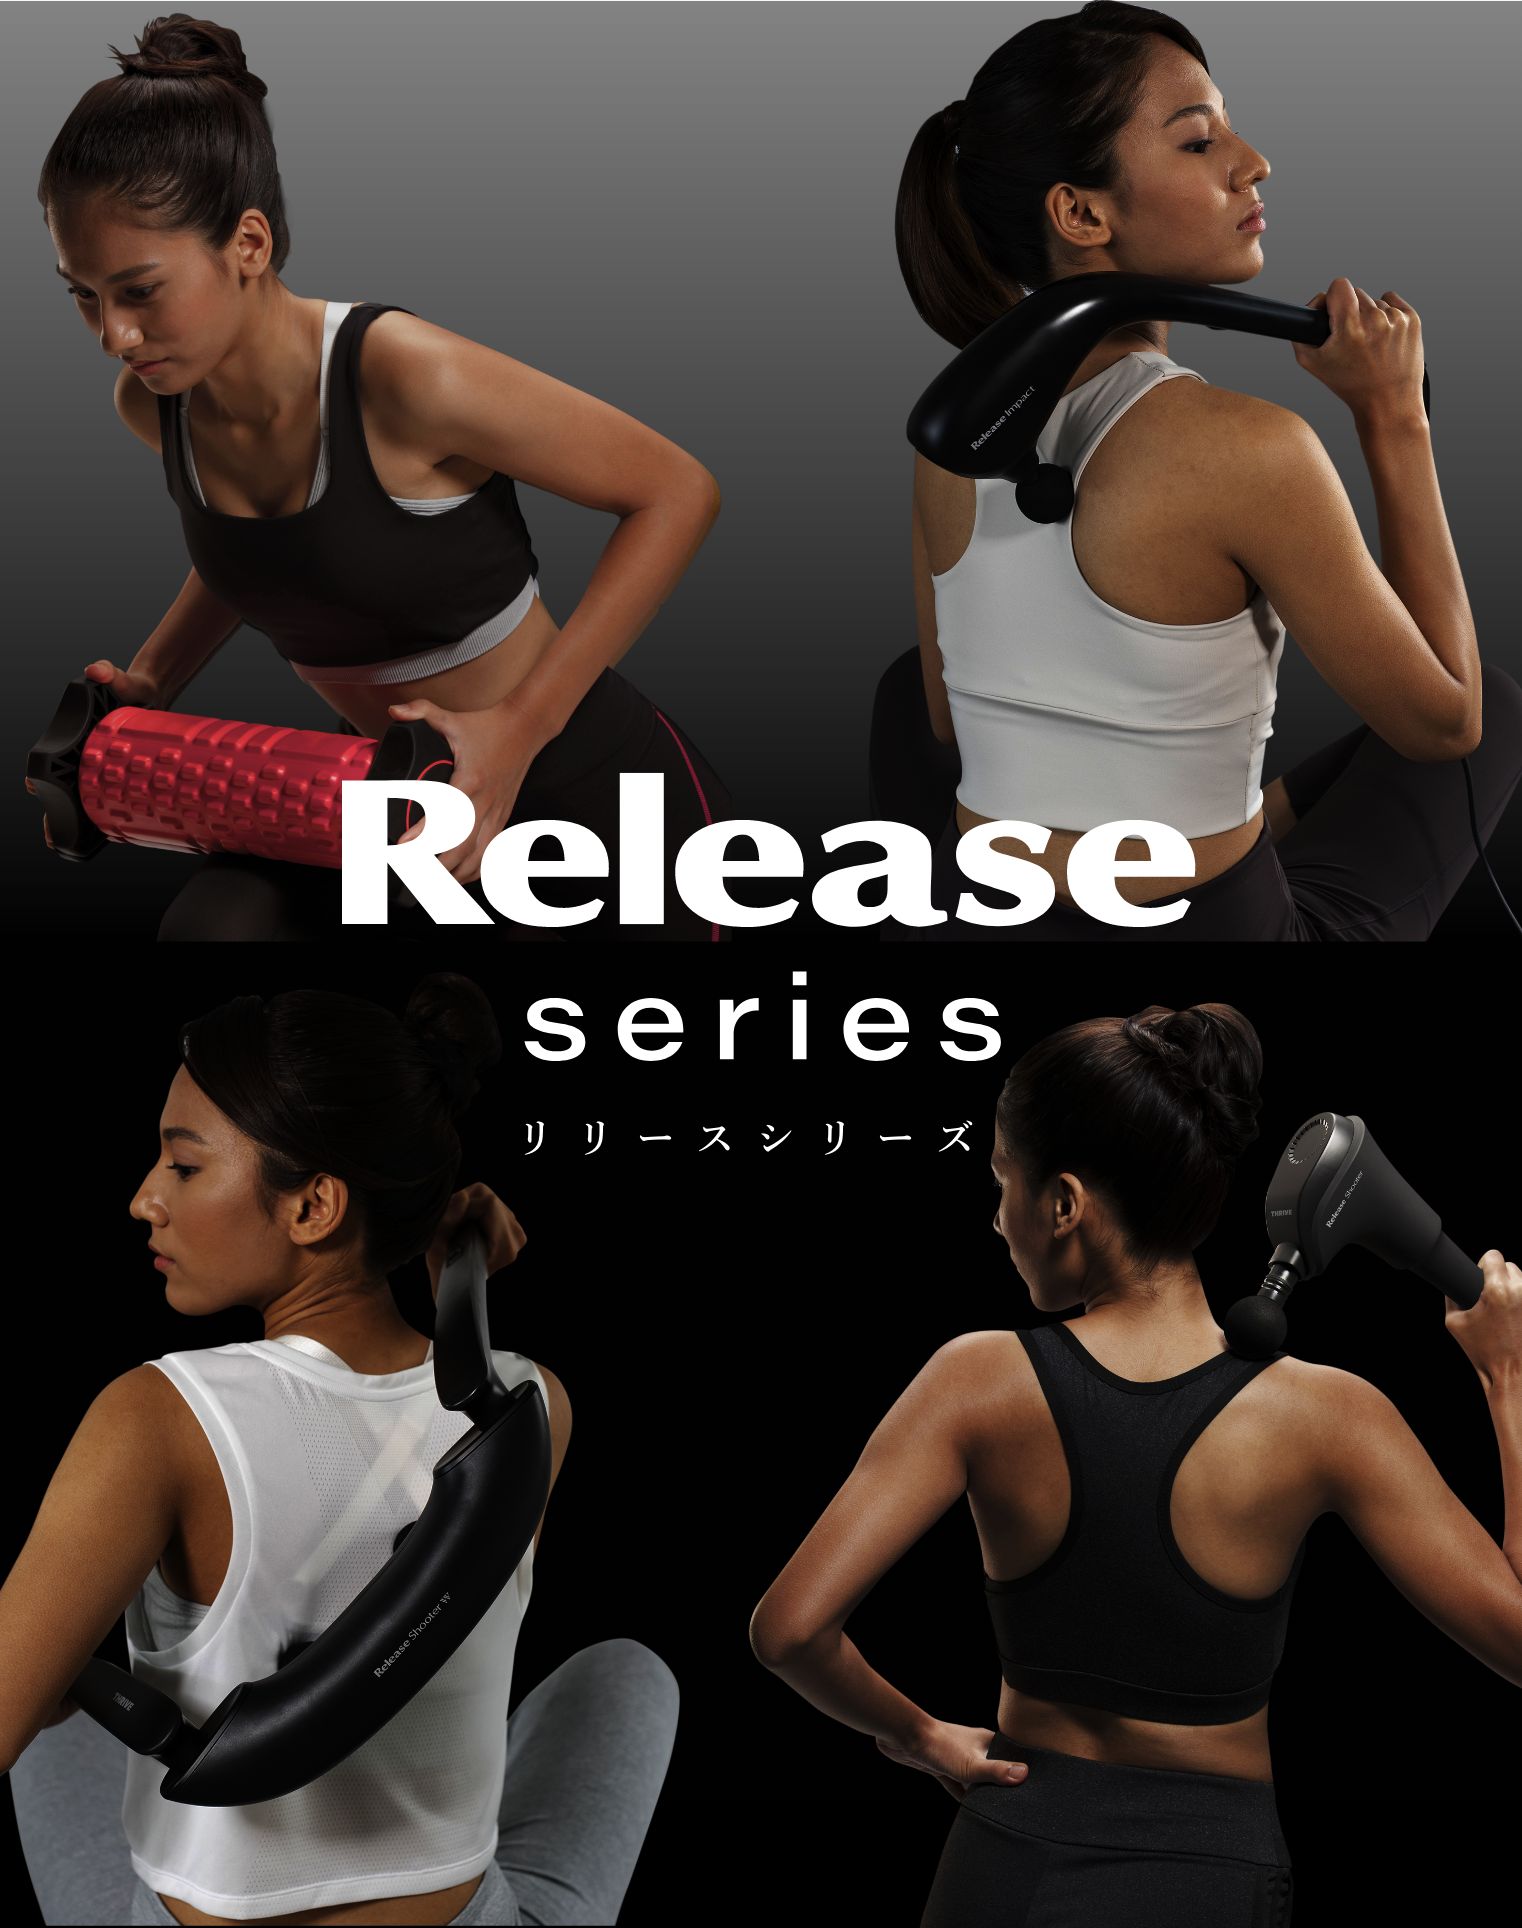 Release series